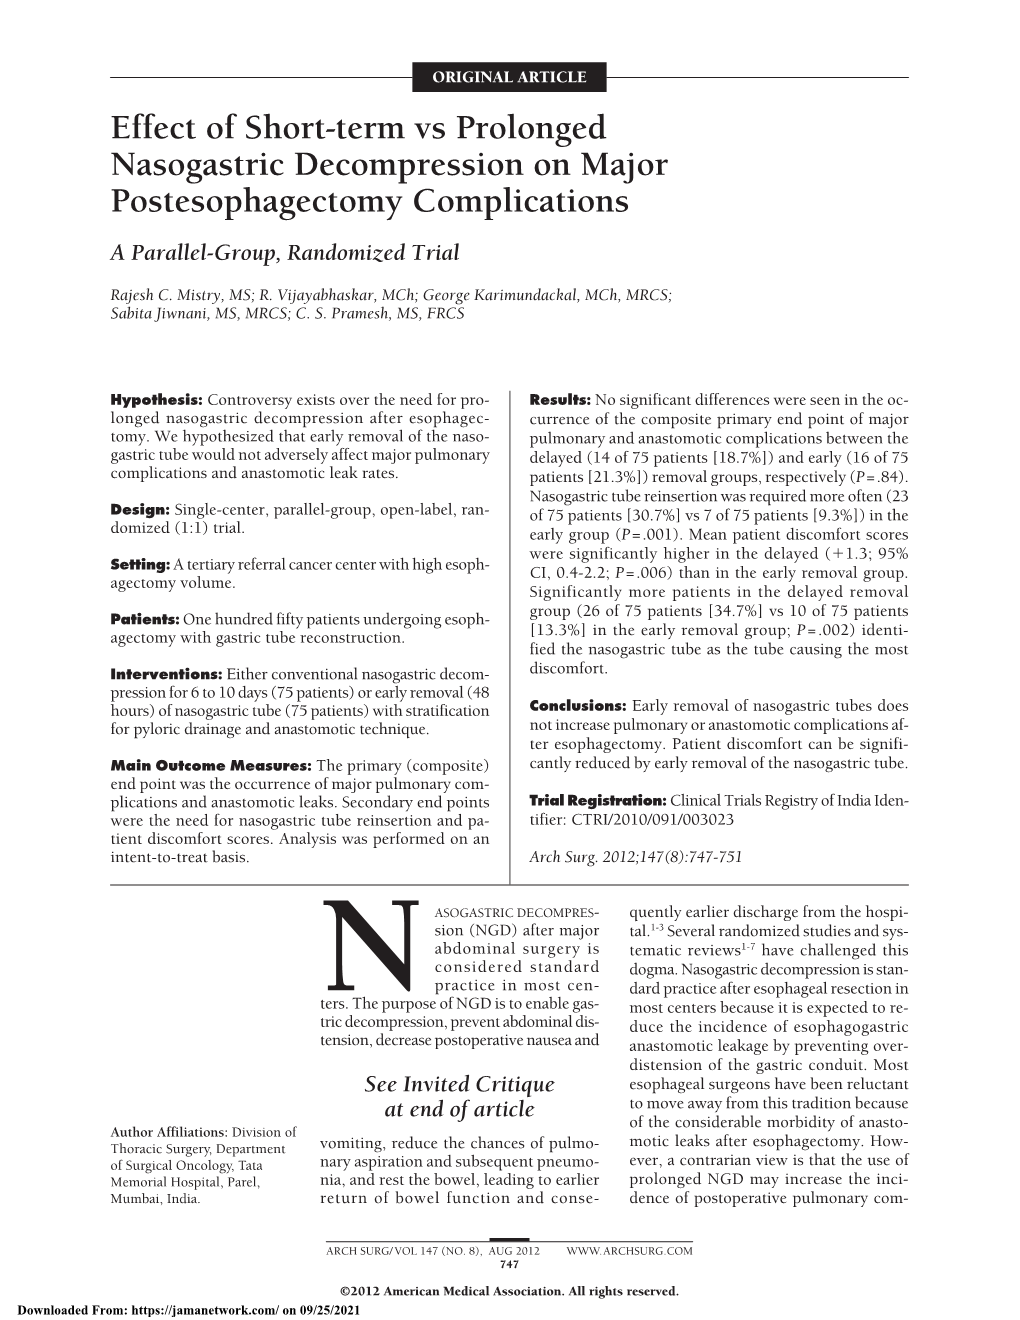 Effect of Short-Term Vs Prolonged Nasogastric Decompression on Major Postesophagectomy Complications a Parallel-Group, Randomized Trial